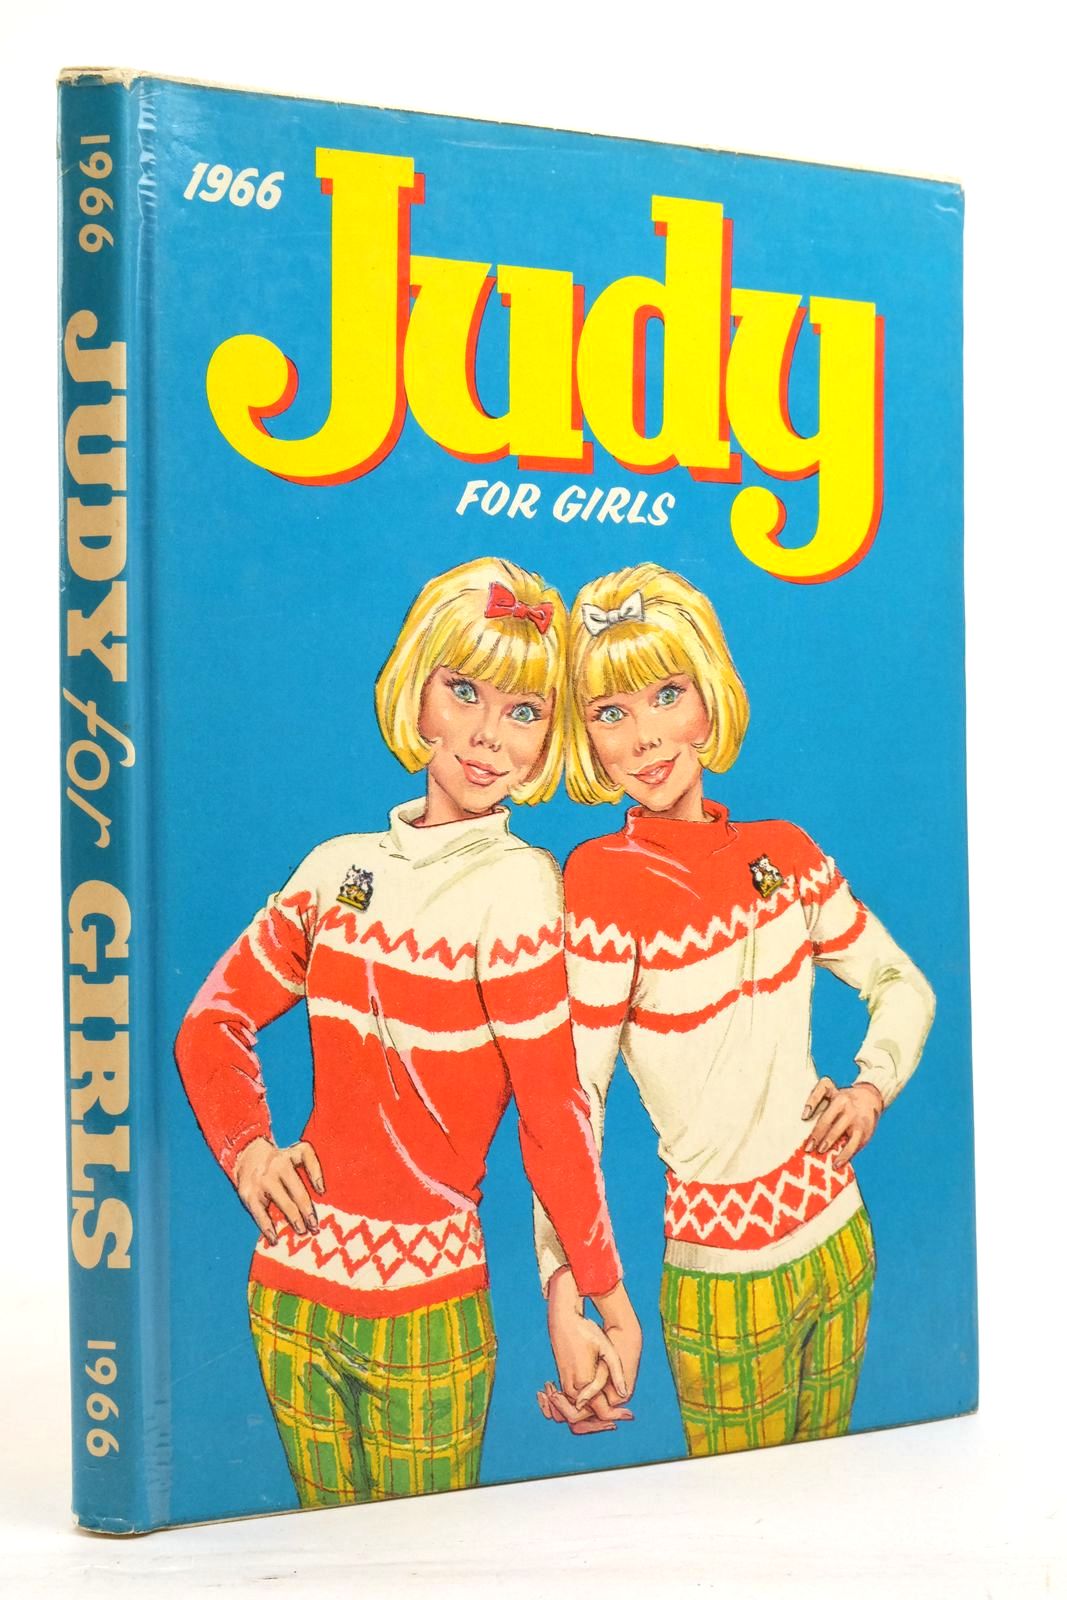 Photo of JUDY FOR GIRLS 1966 published by D.C. Thomson &amp; Co Ltd. (STOCK CODE: 2138029)  for sale by Stella & Rose's Books